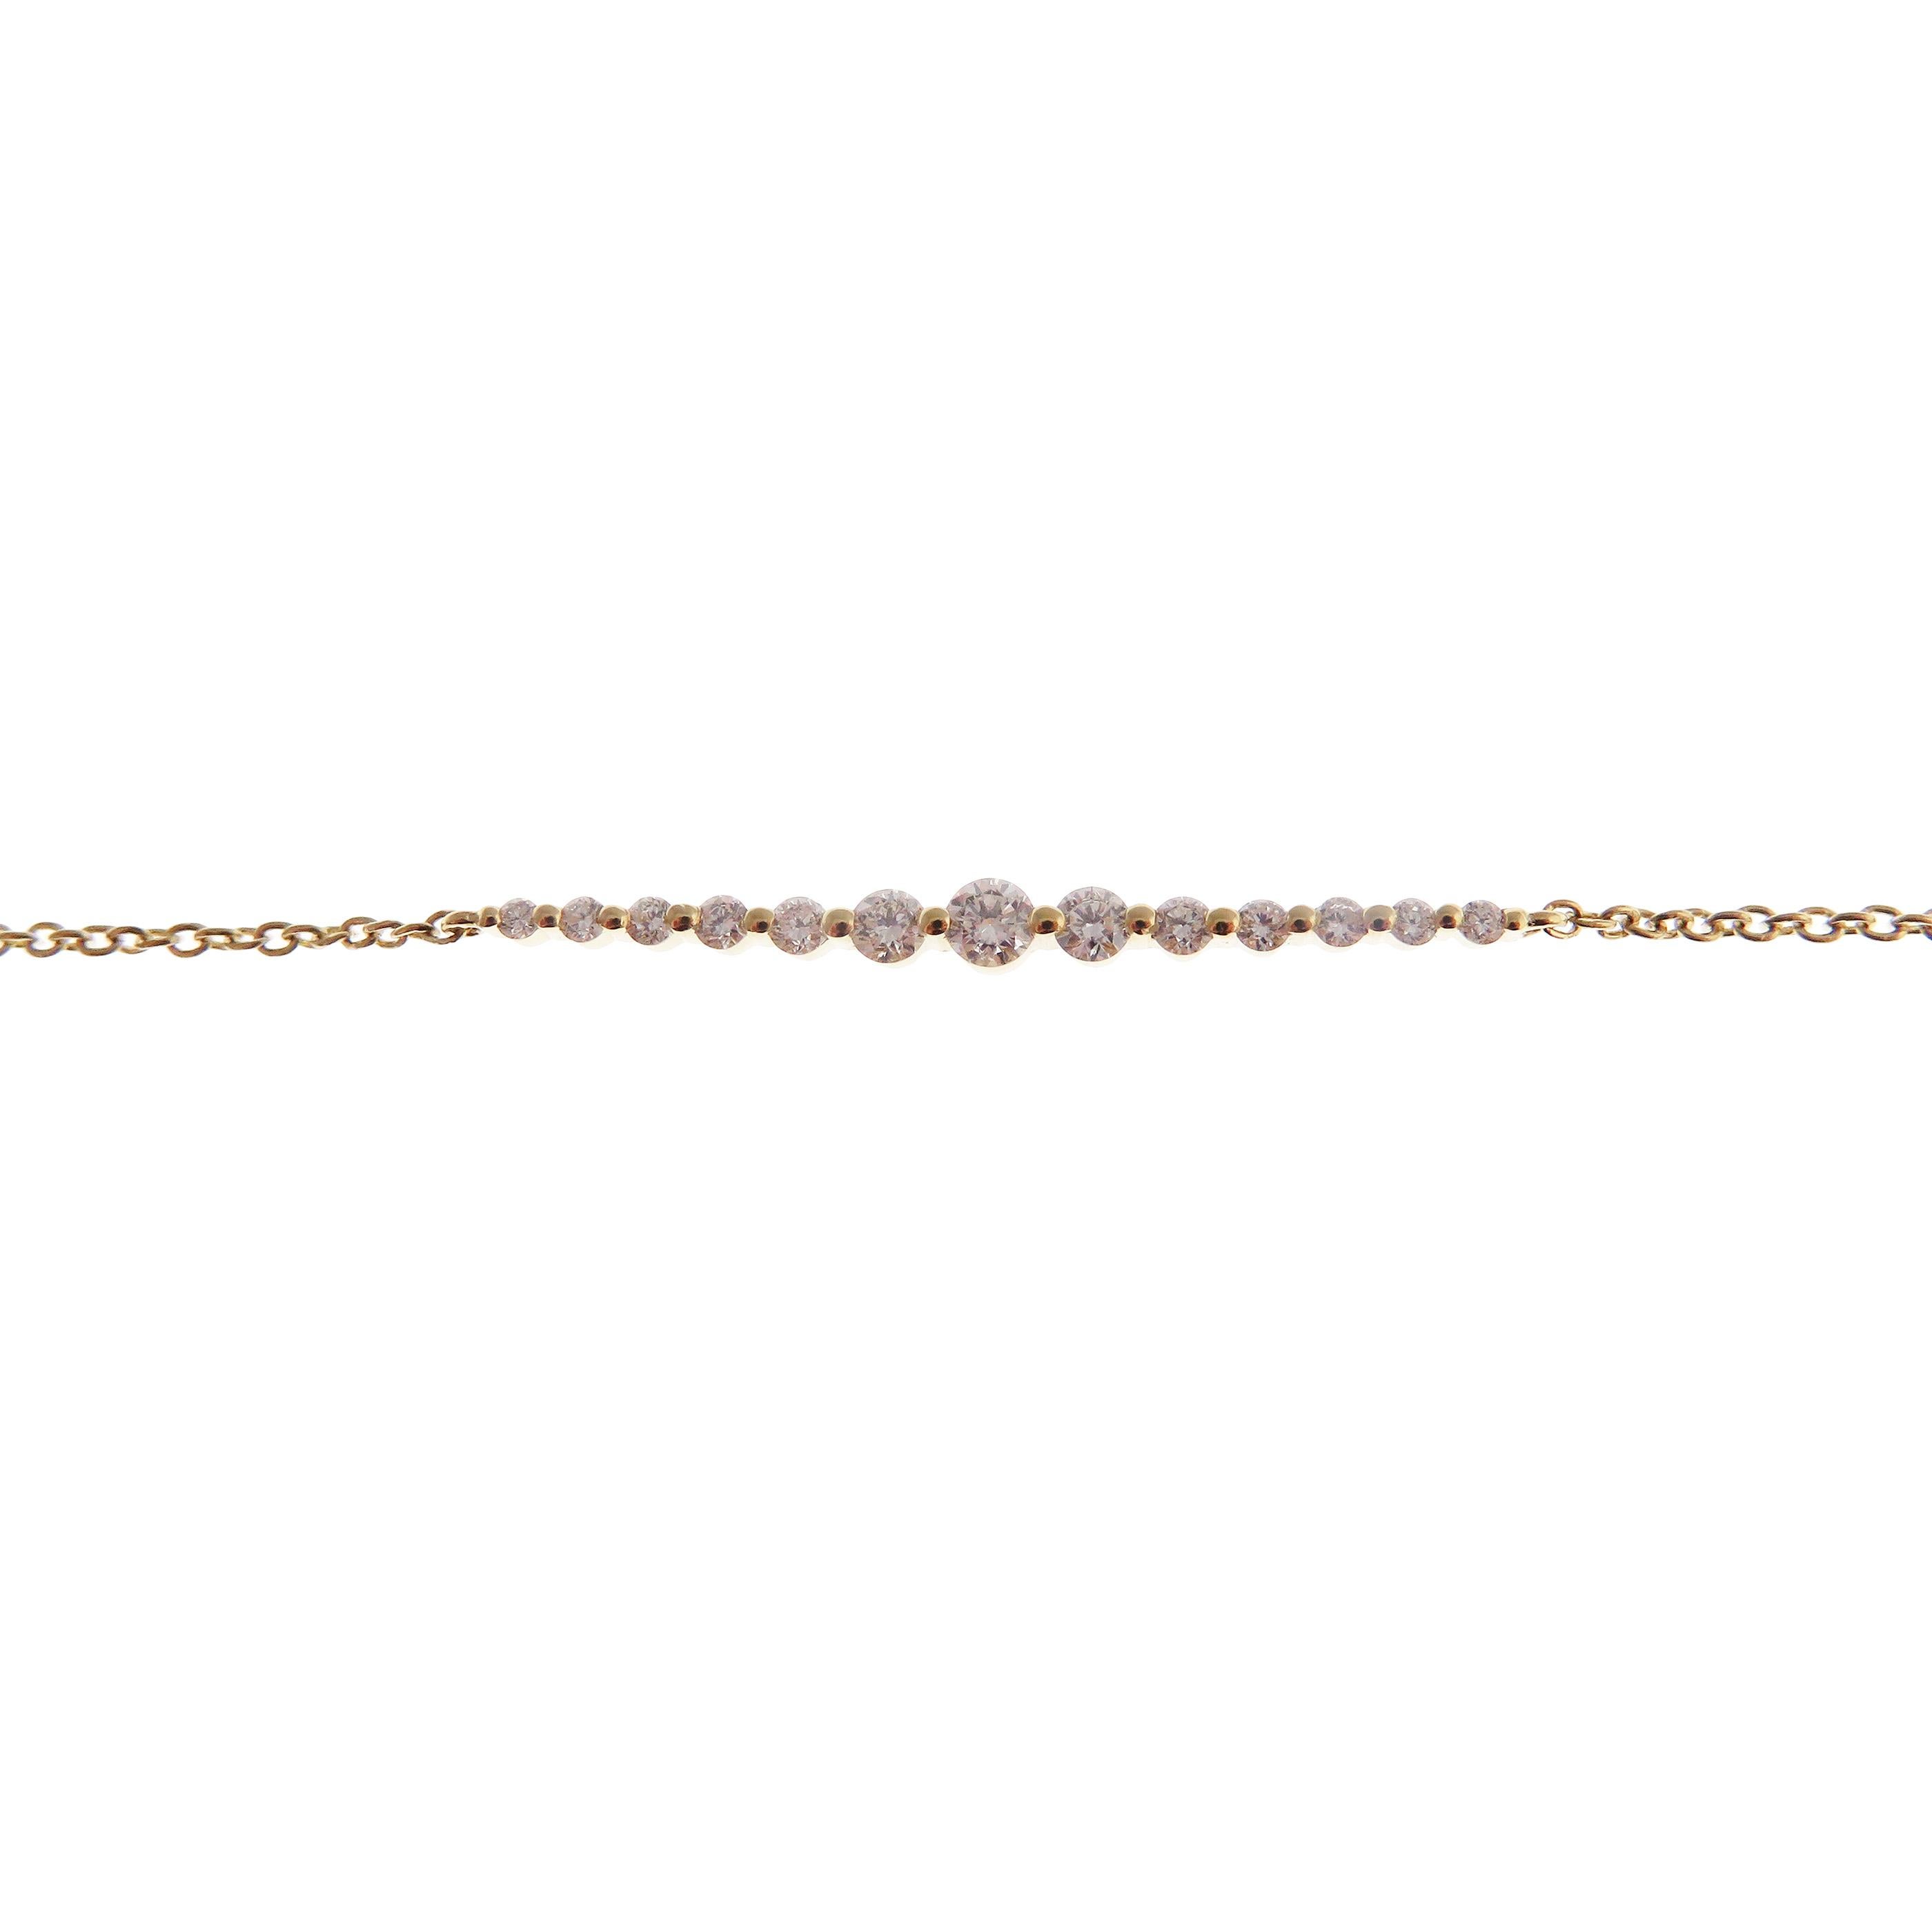 This delicate, diamond bracelet is crafted in 18-karat yellow gold, weighing approximately 0.34 total carats of SI Quality white diamonds. 
Bracelet clasp is spring ring with adjustable size.

Bracelet is approximately 7